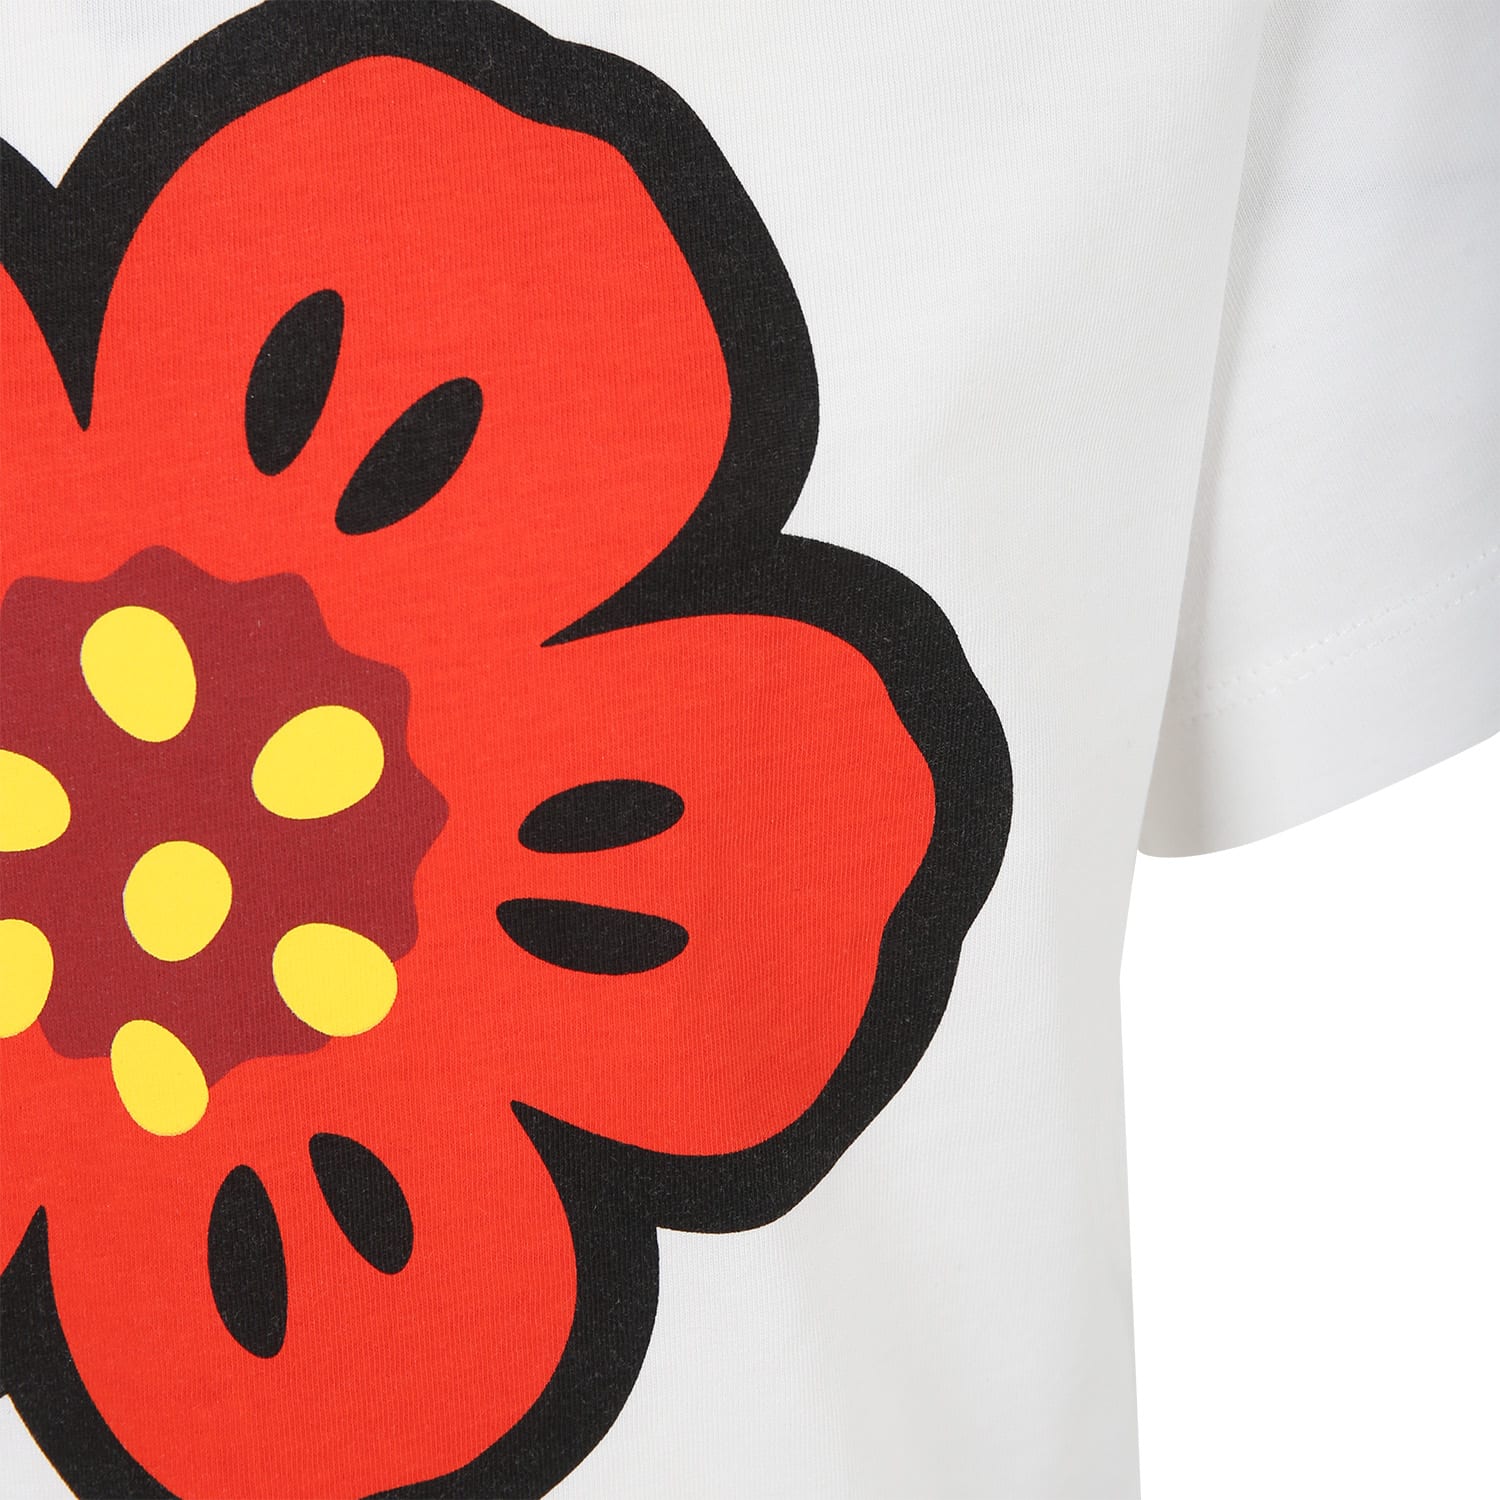 Shop Kenzo White T-shirt For Girl With Flower In Bianco